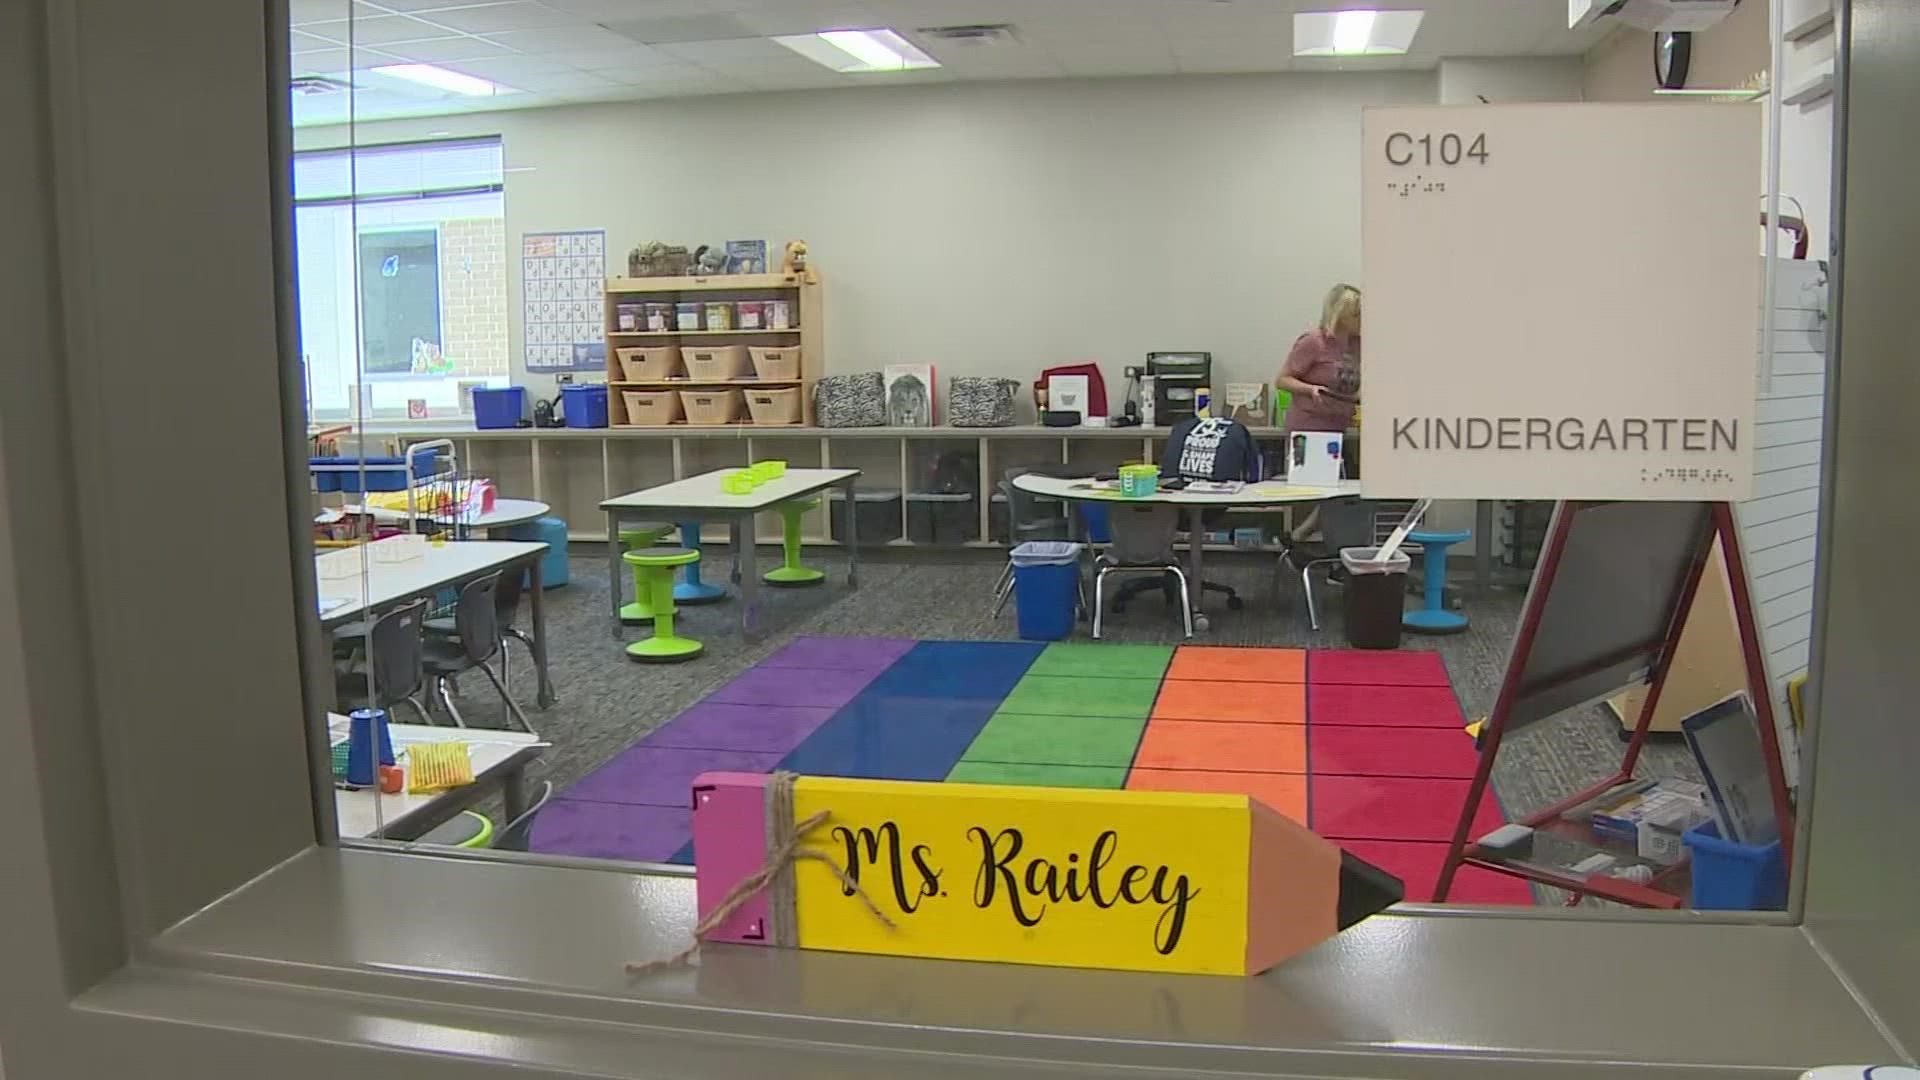 Monday marks the first day of school — KHOU 11's Michelle Choi reports